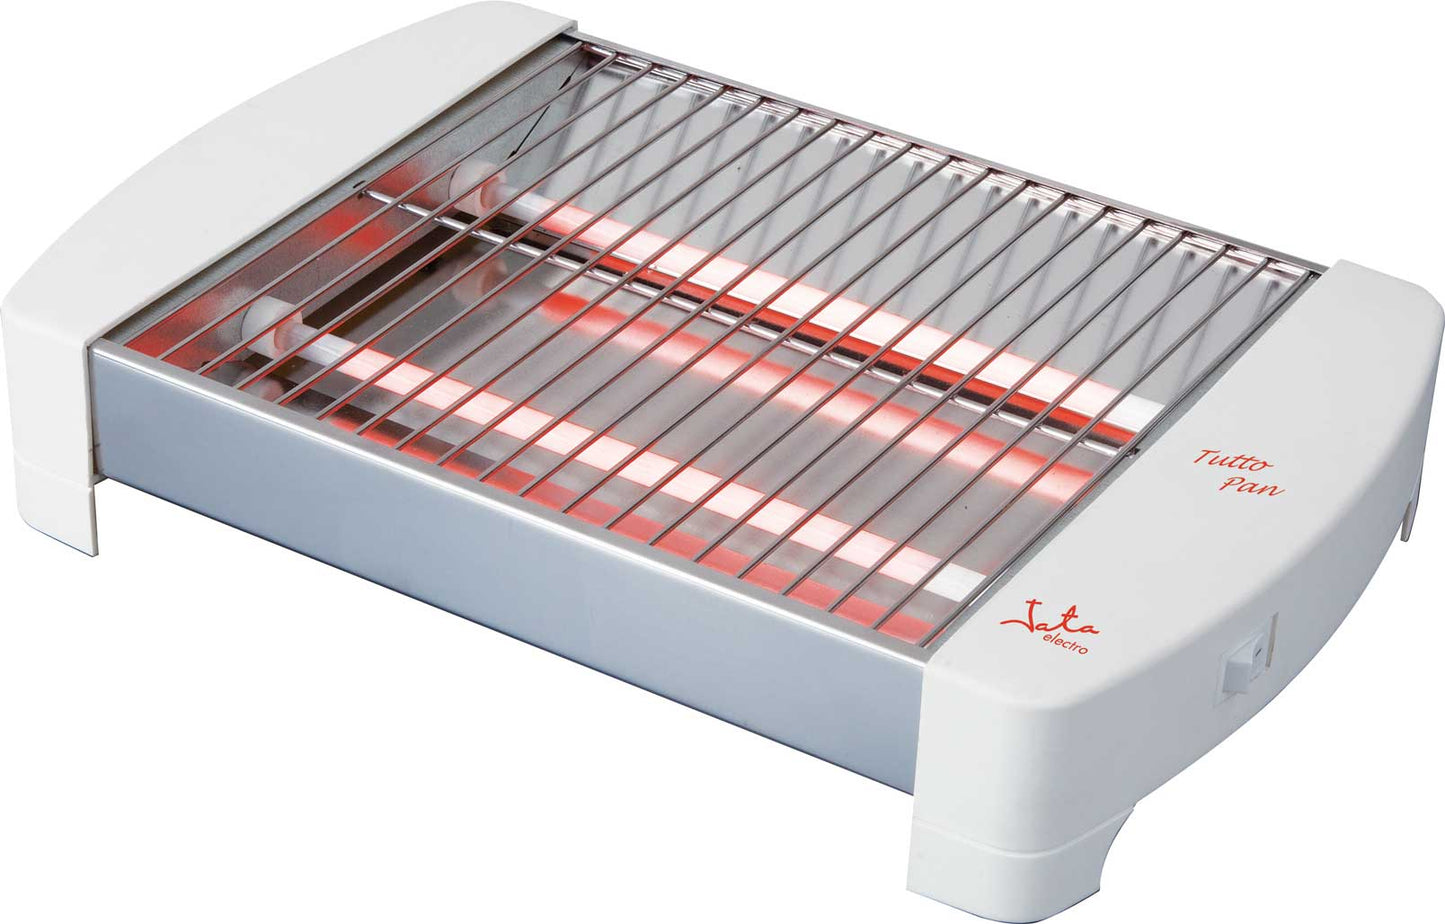 Stainless steel toaster Jata TT587 - 4000W, long slots, removable crumb tray